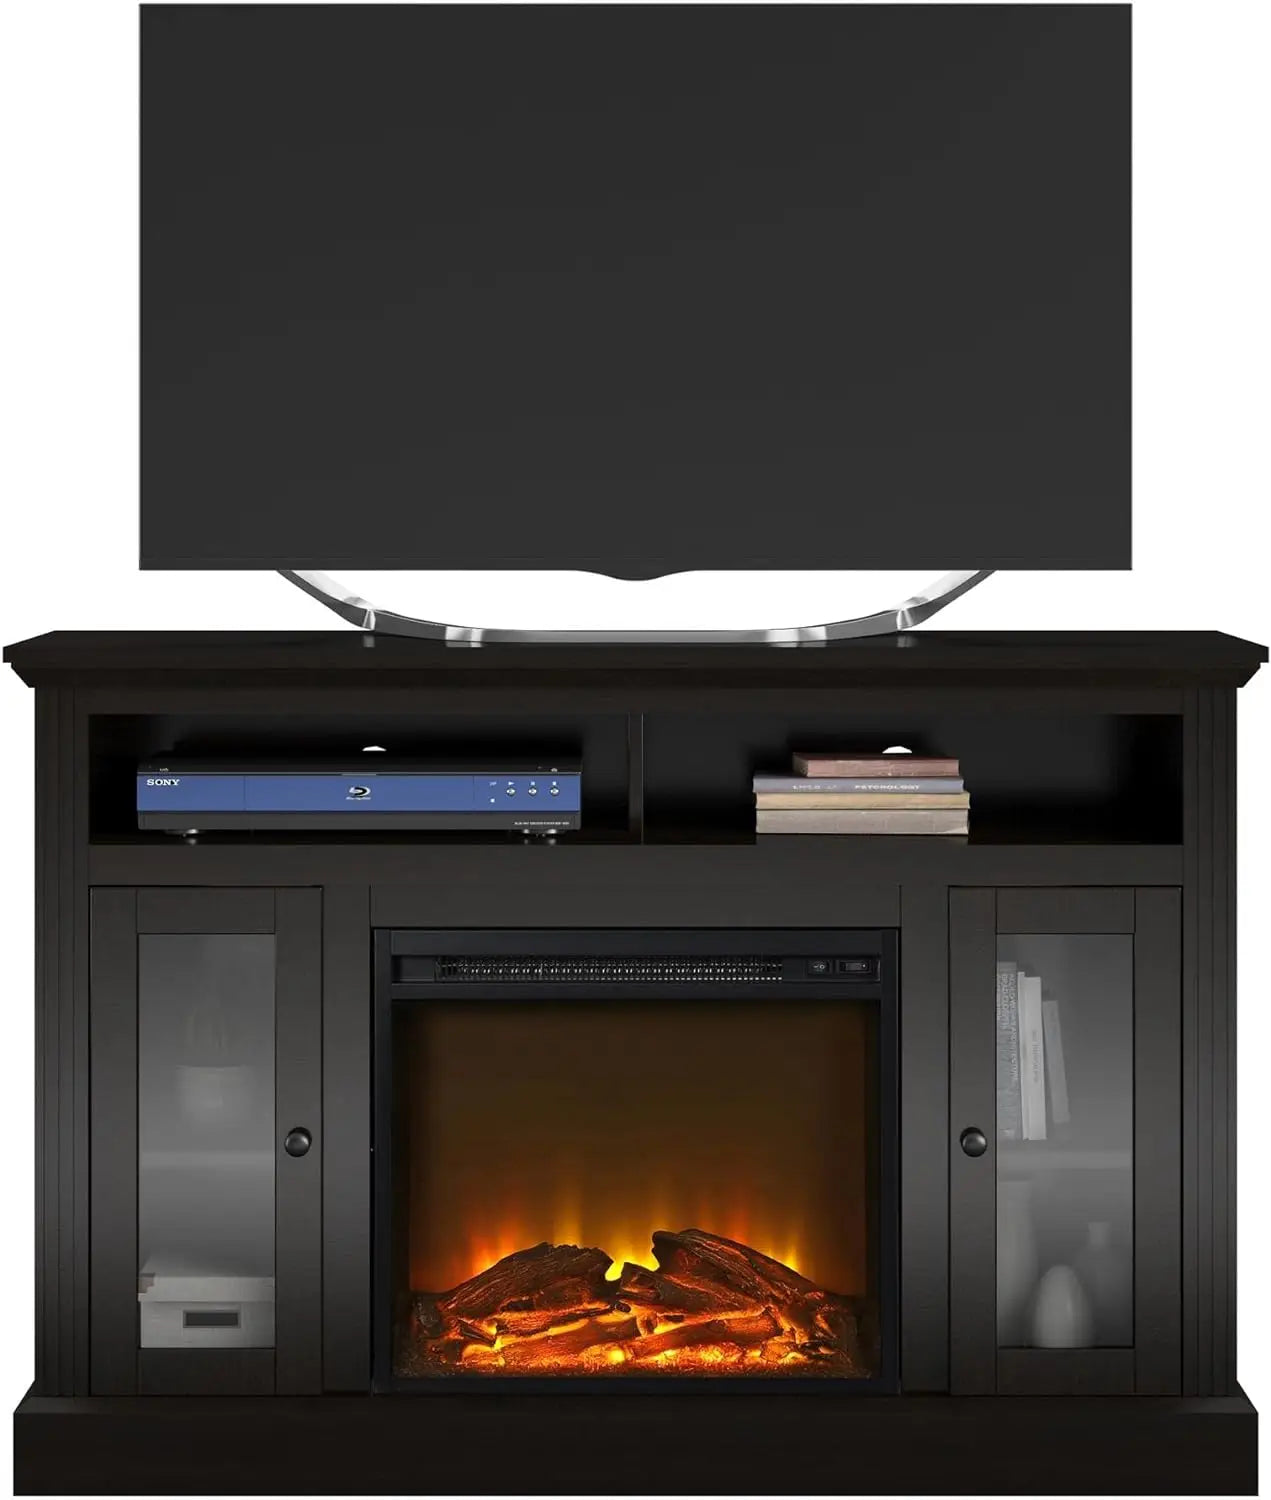 Ameriwood Home Chicago Electric Fireplace TV Console for TVs up to a 50", Espresso